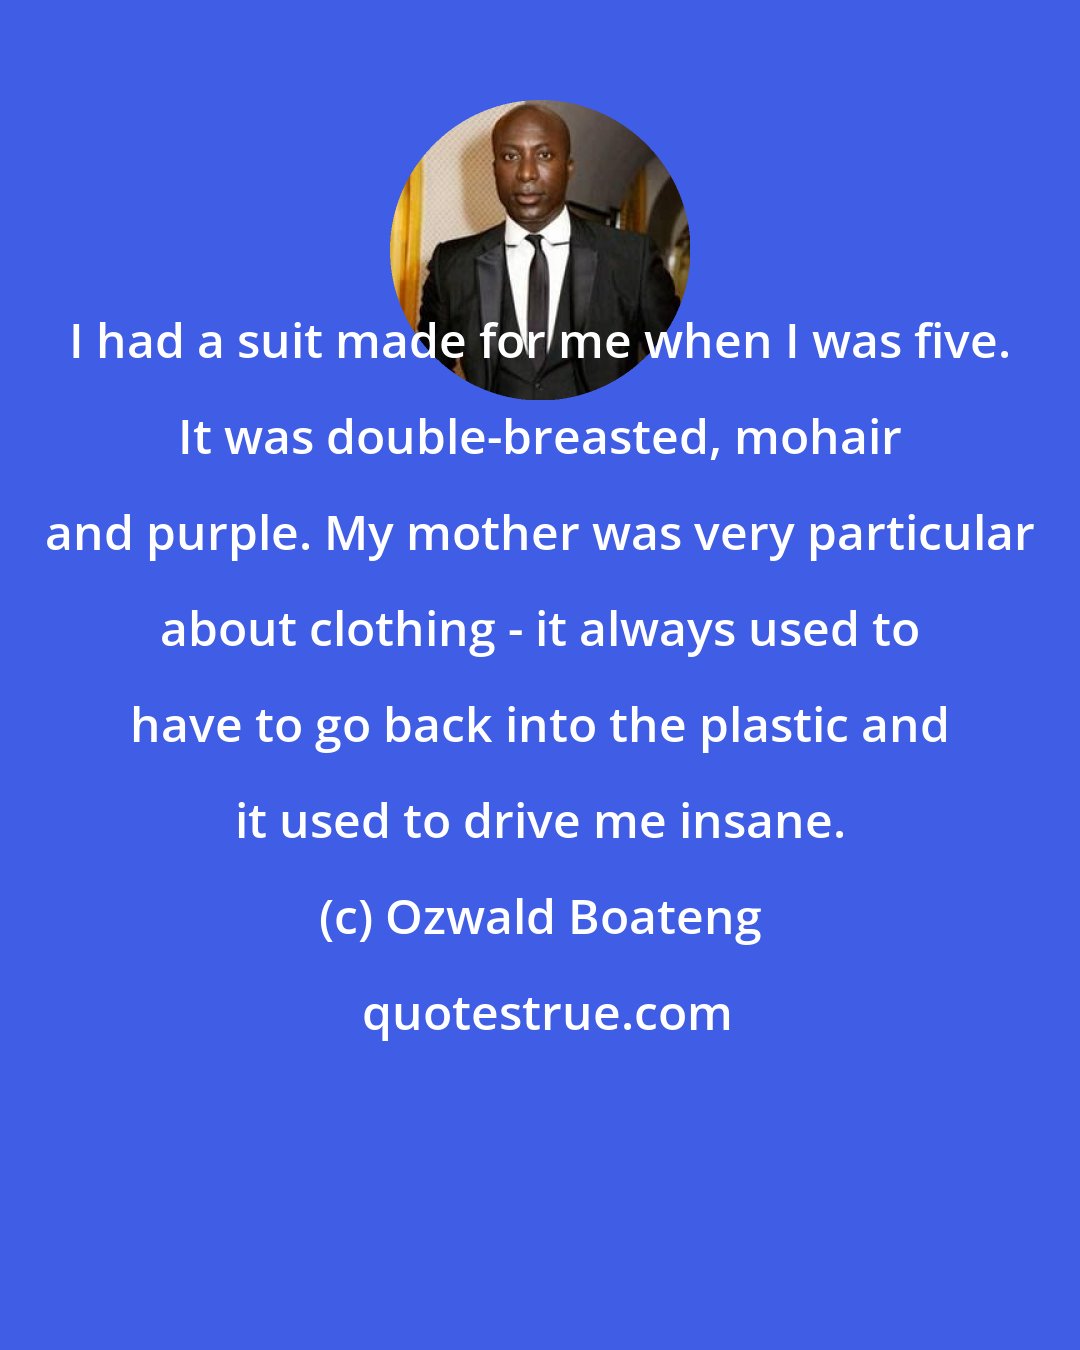 Ozwald Boateng: I had a suit made for me when I was five. It was double-breasted, mohair and purple. My mother was very particular about clothing - it always used to have to go back into the plastic and it used to drive me insane.